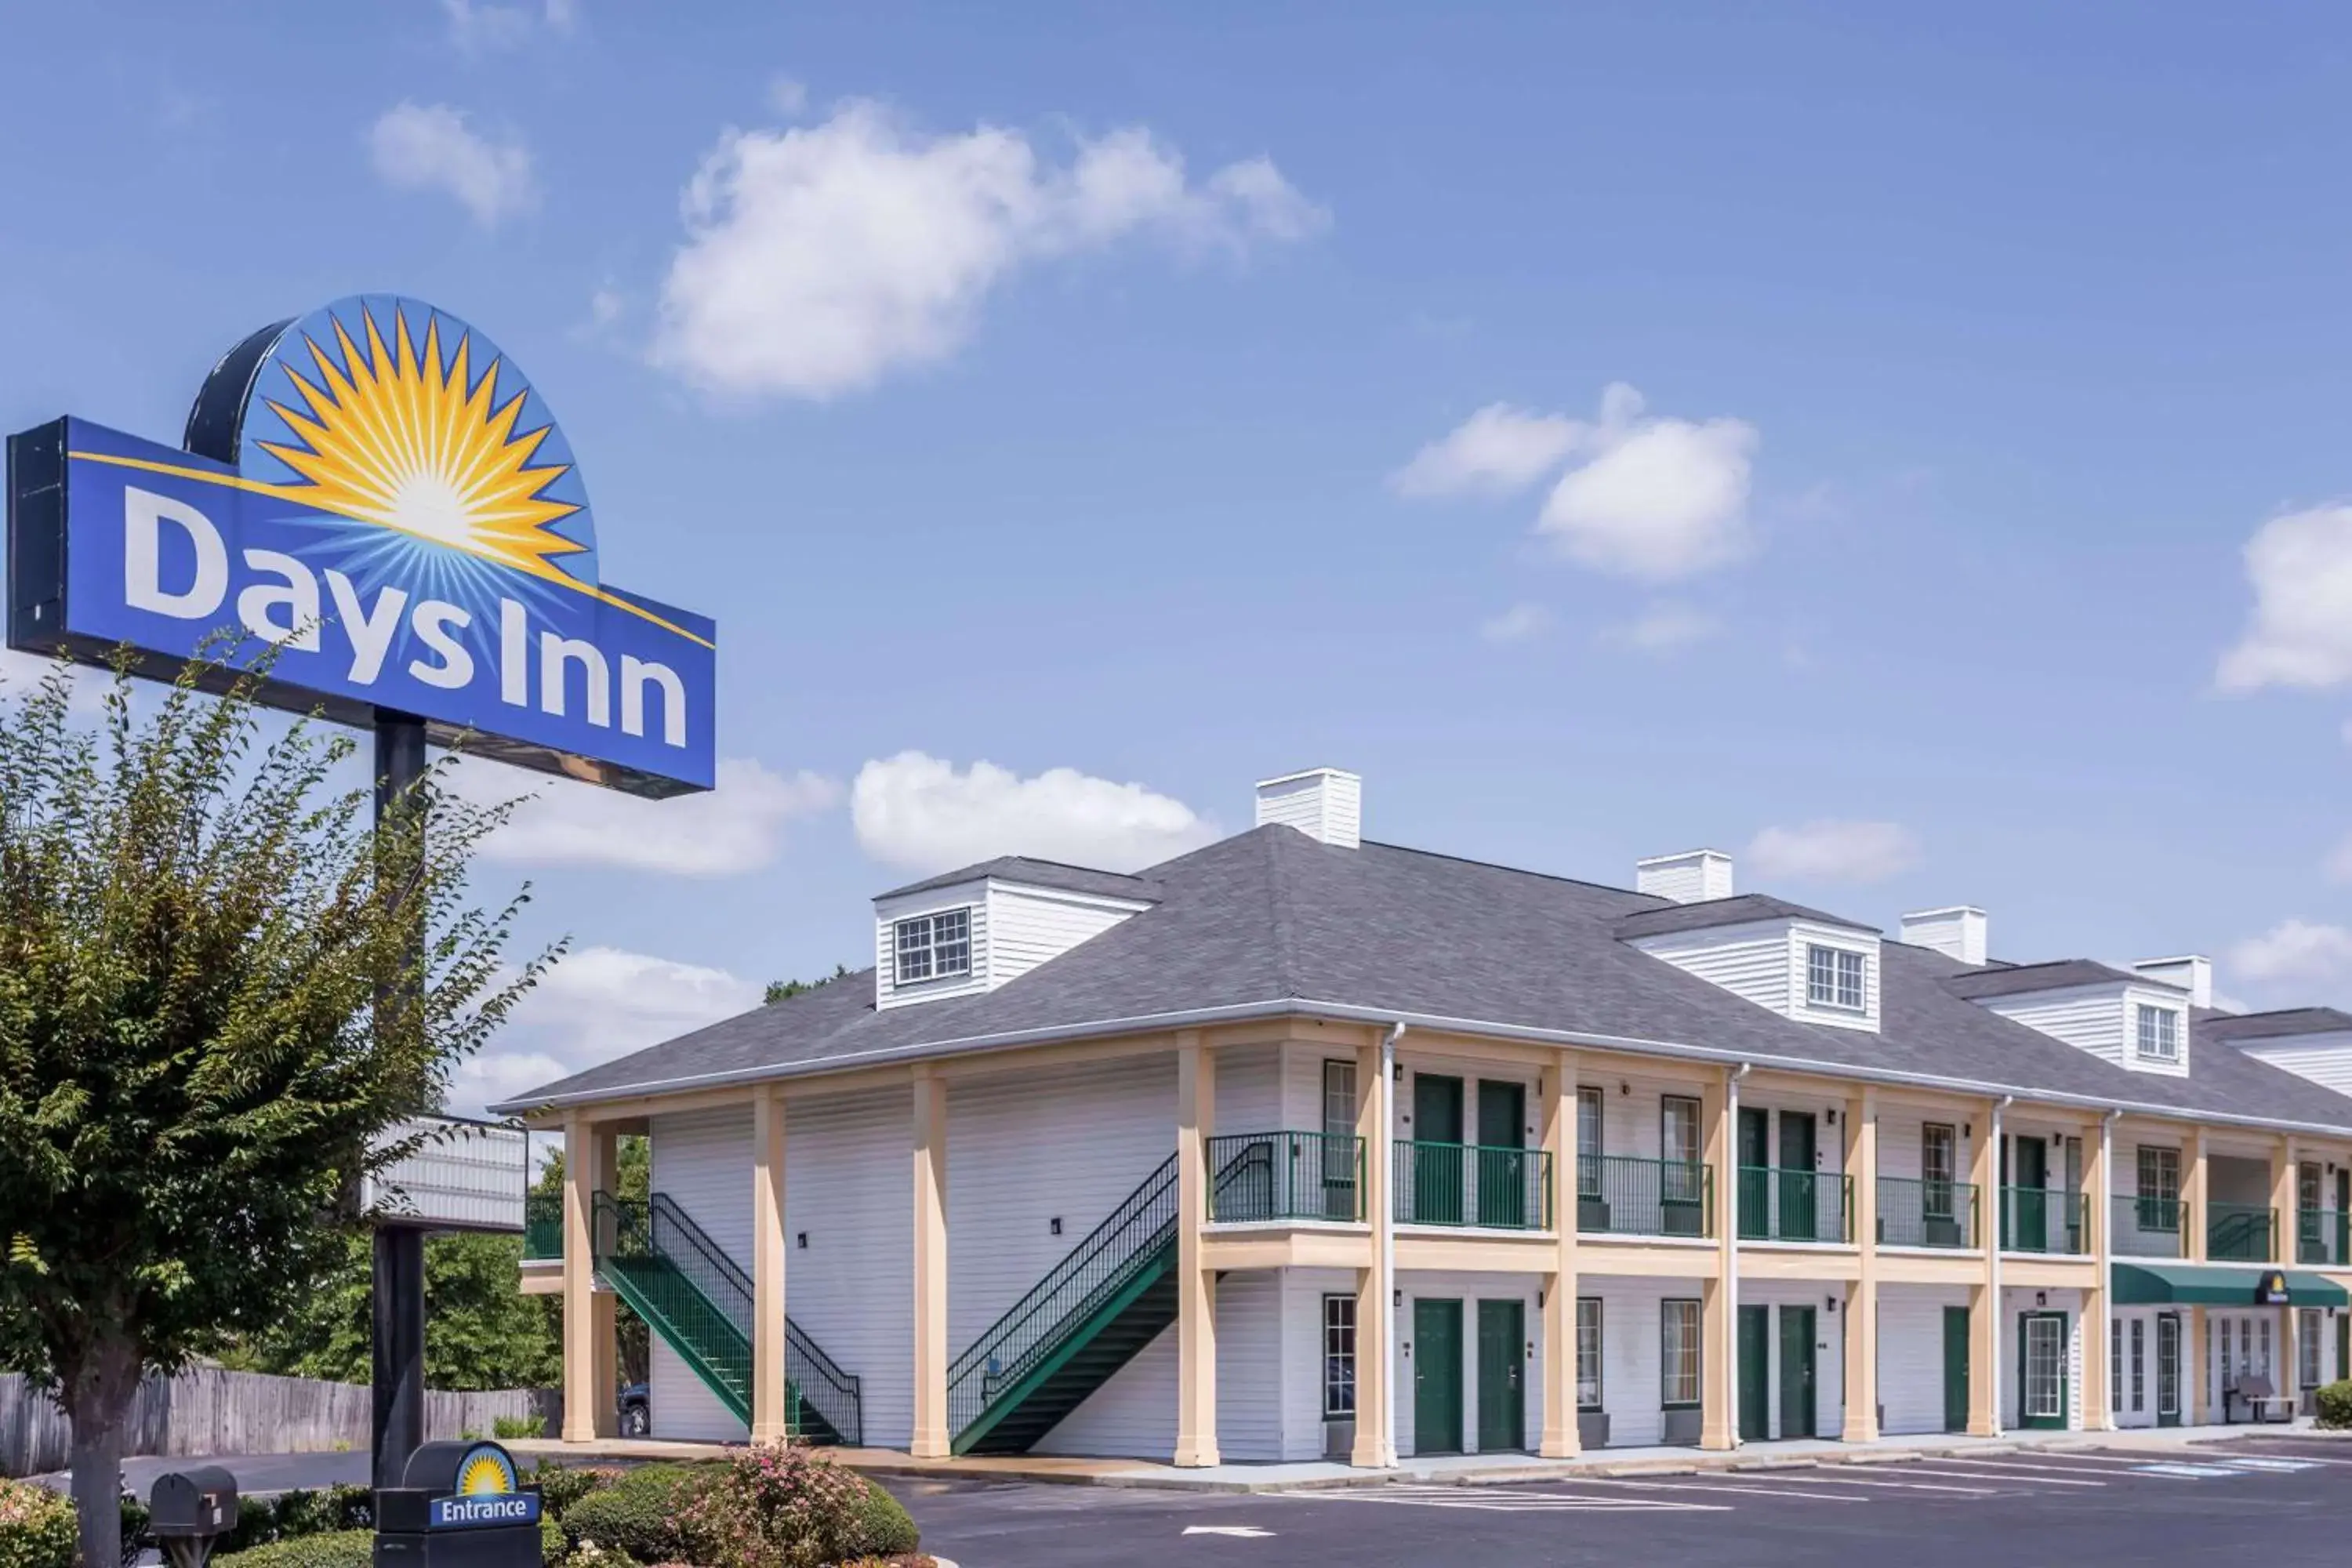 Property building in Days Inn by Wyndham Simpsonville